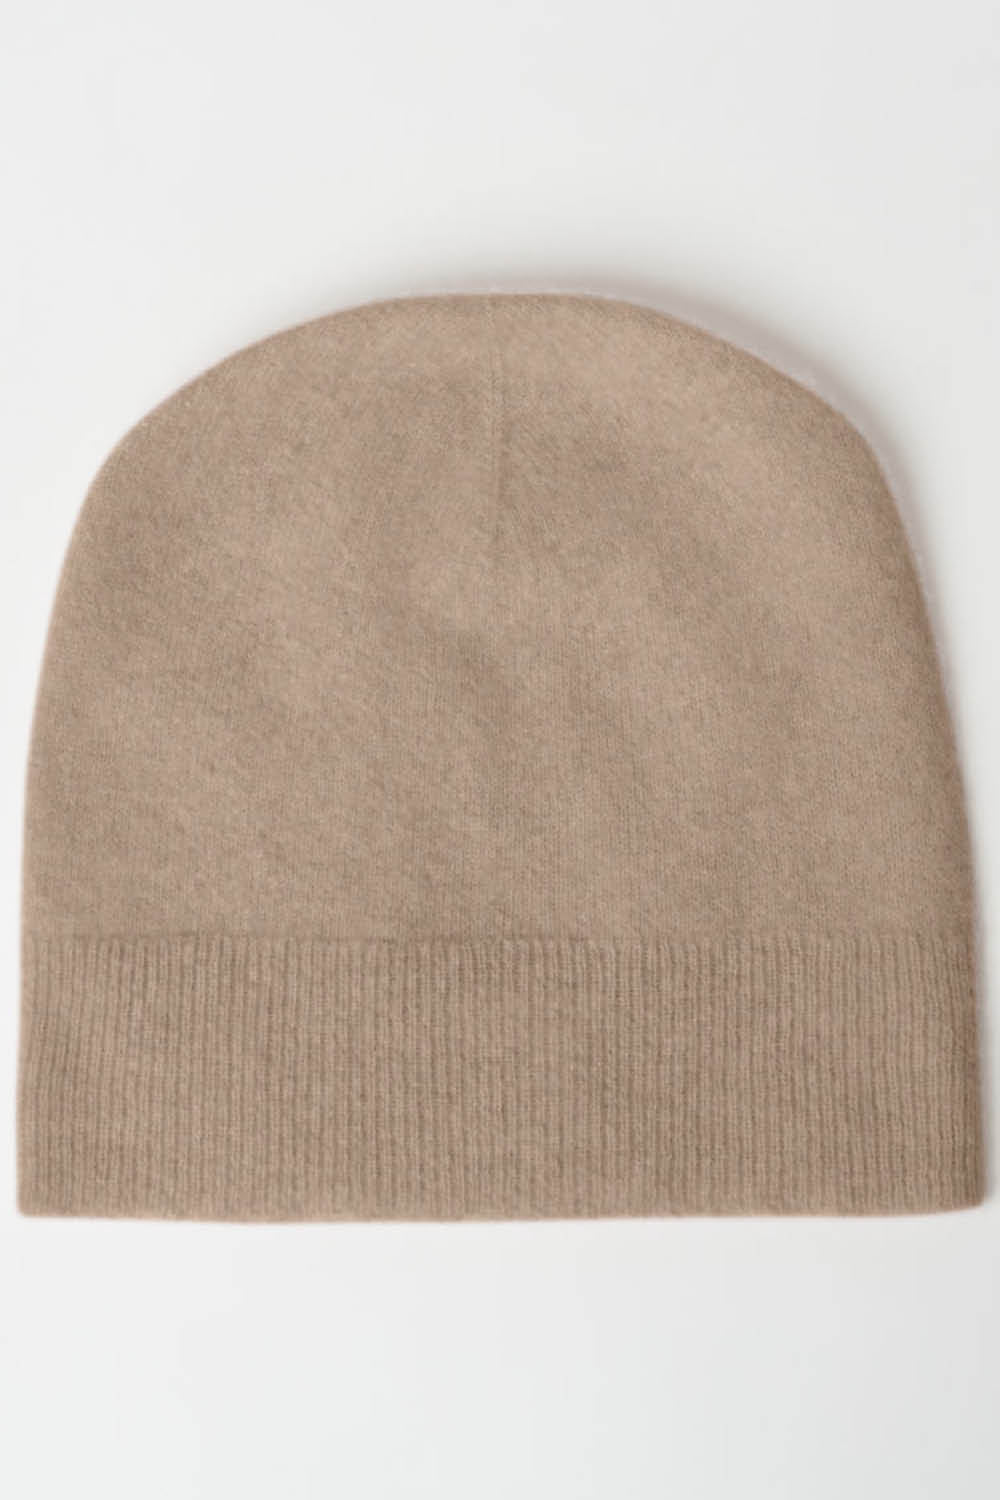 Alby Cashmere Beanie Hat in Fawn